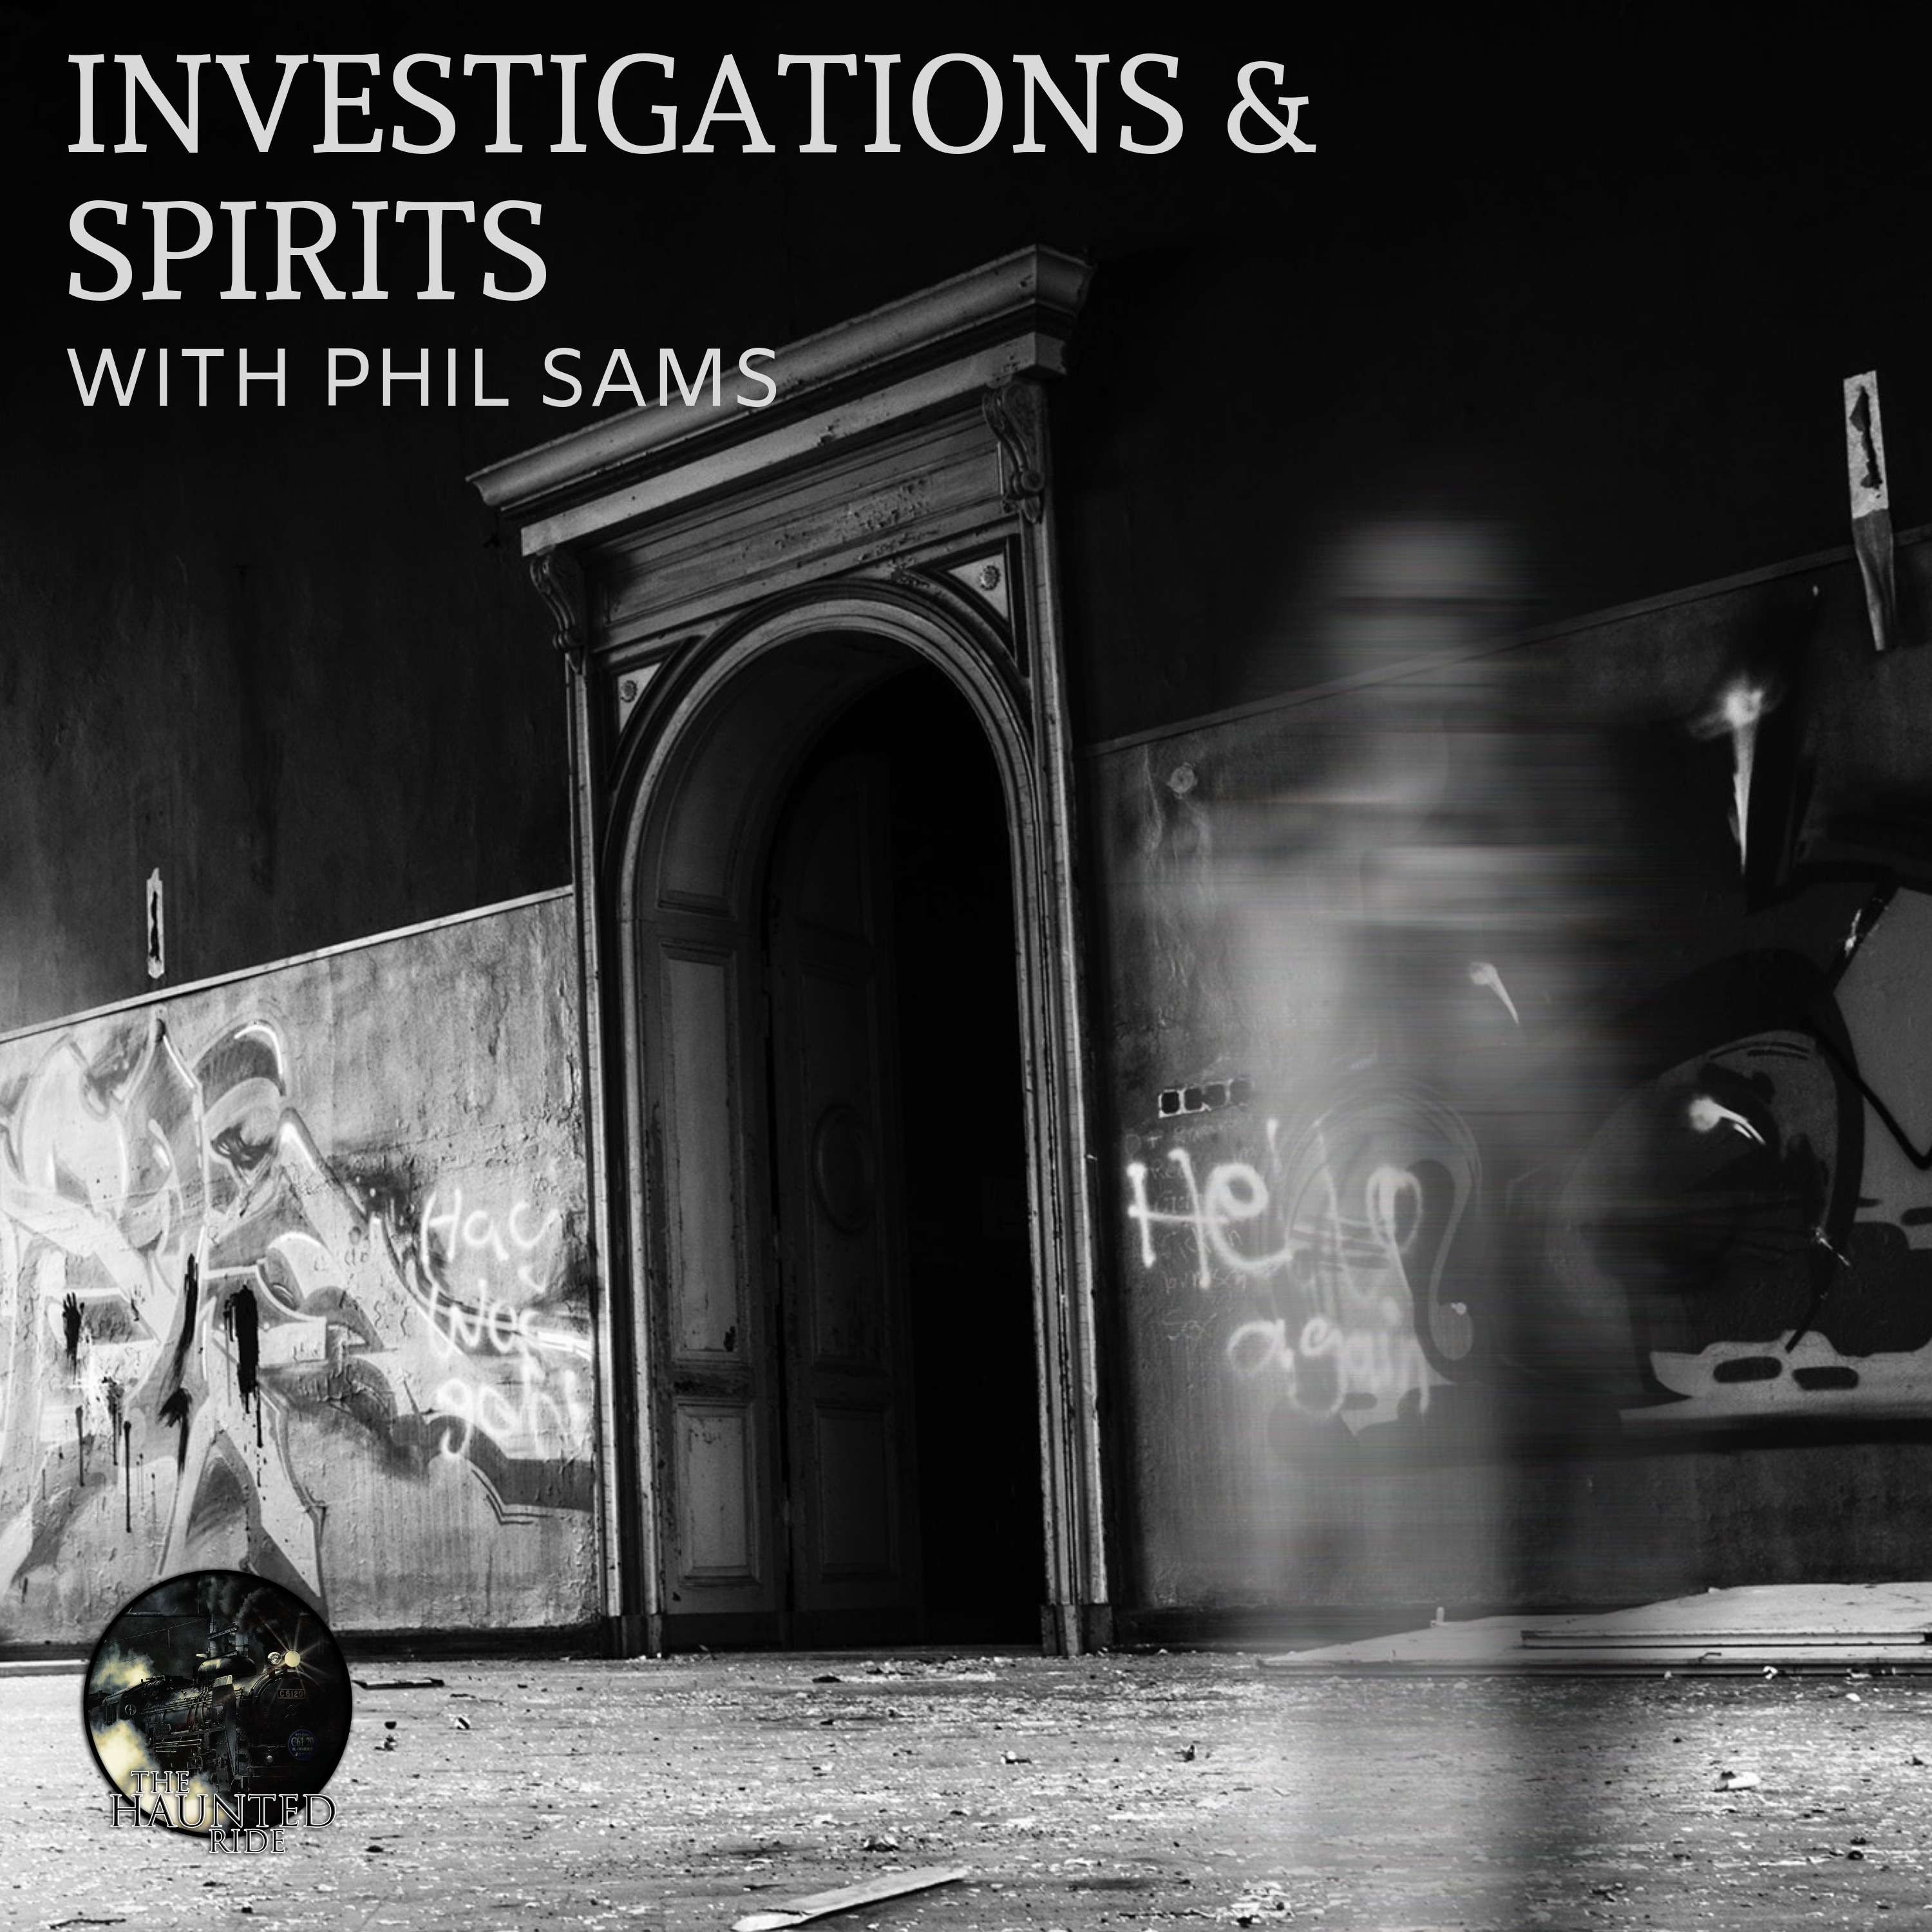 16: Investigations & Spirits with Phil Sams